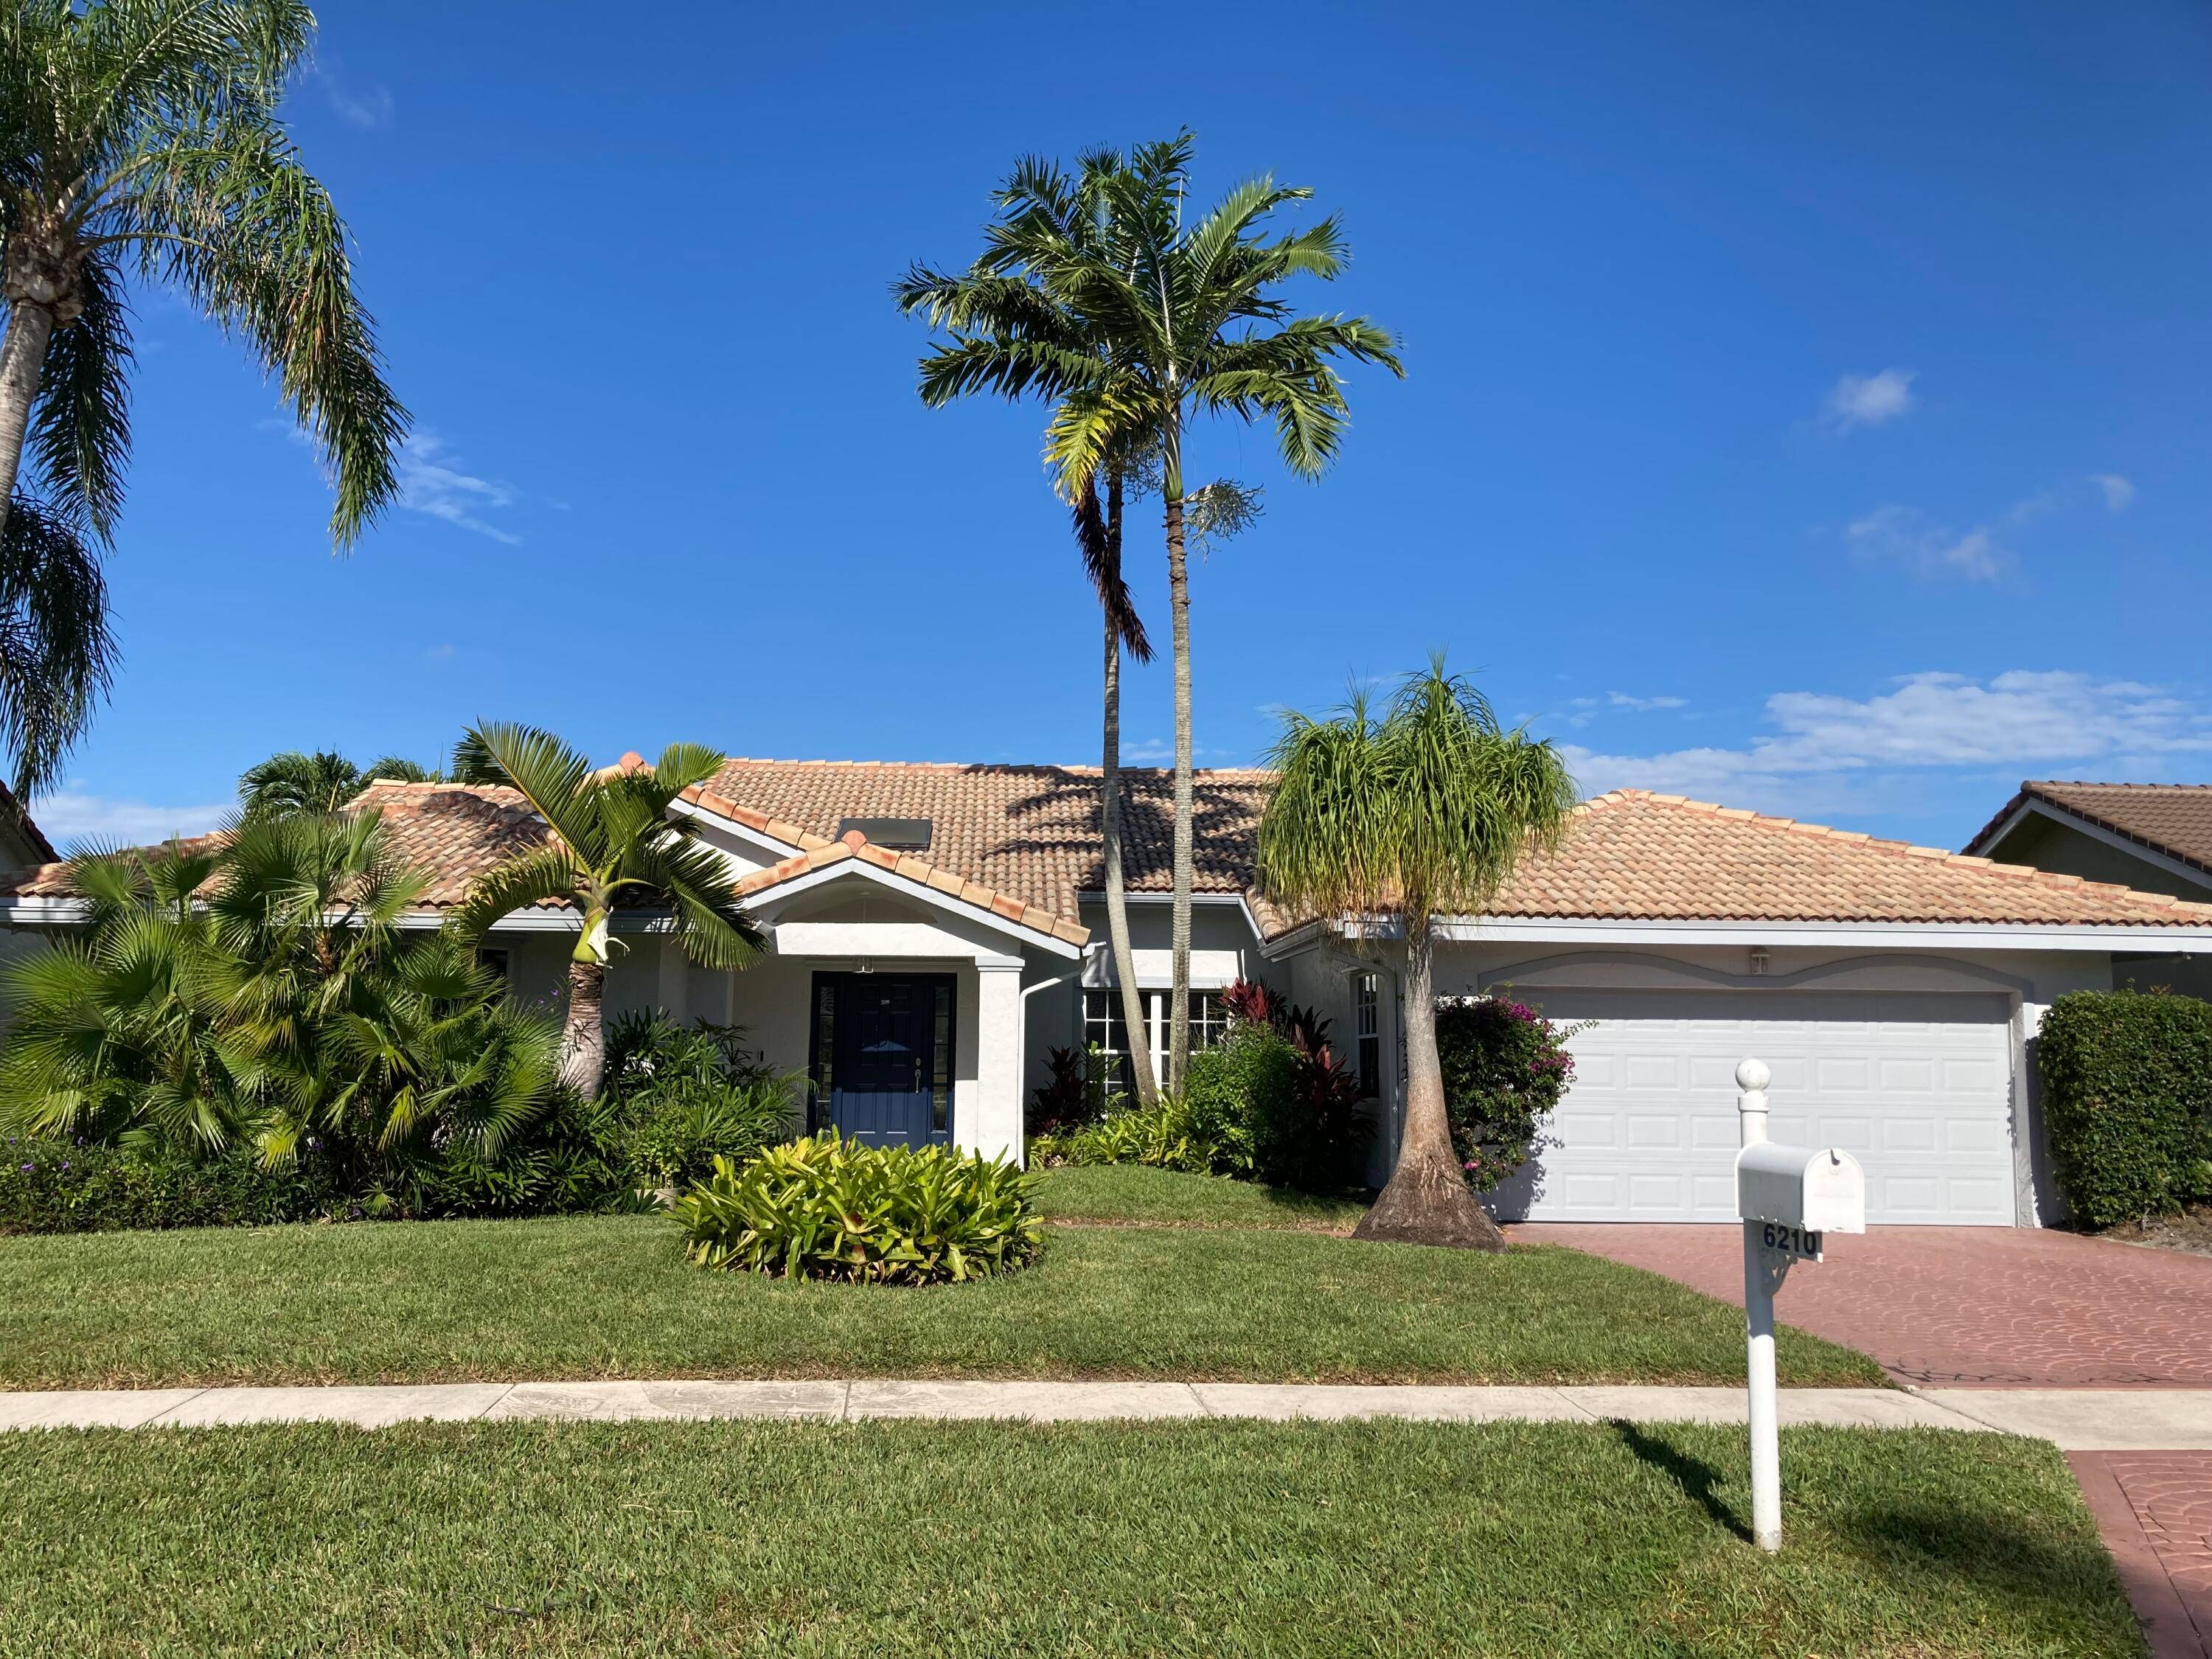 ''FLORIDA LIFESTYLE'' Beautifull Family Home in ALL AGES Community Great Schools Spacious Bedrooms with seating area Skylights great for natural light Private Screened Pool w Jacuzzi Golf and Lake views ...